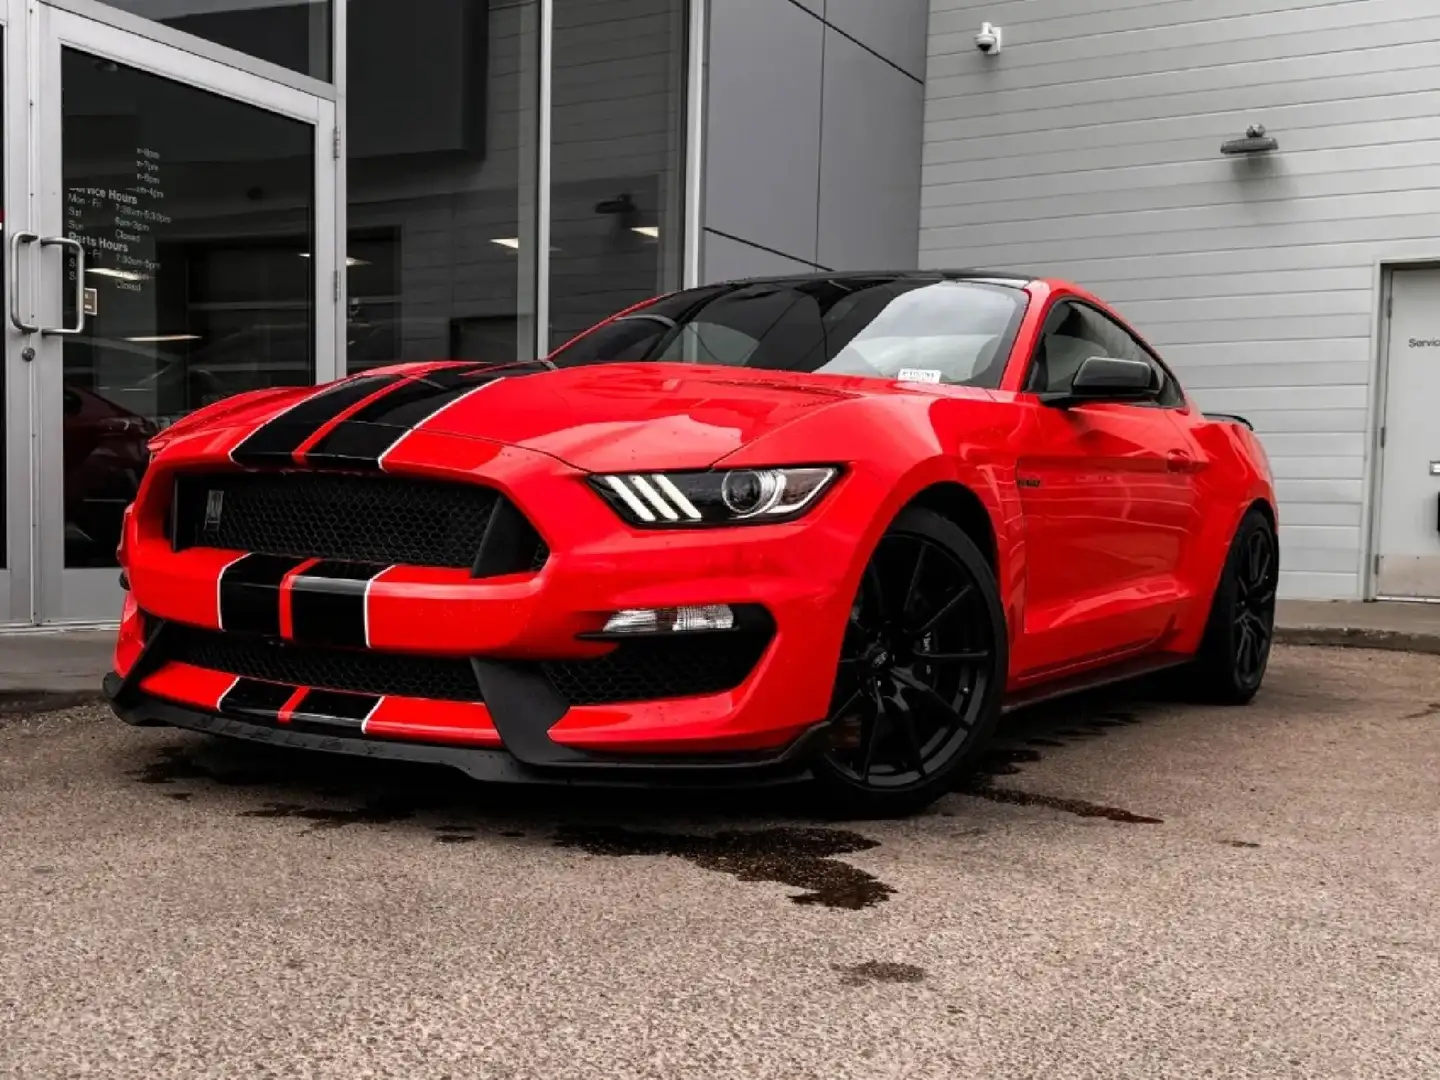 Ford Mustang SHELBY GT350 5.2L V8 GT 350 2016 - 1